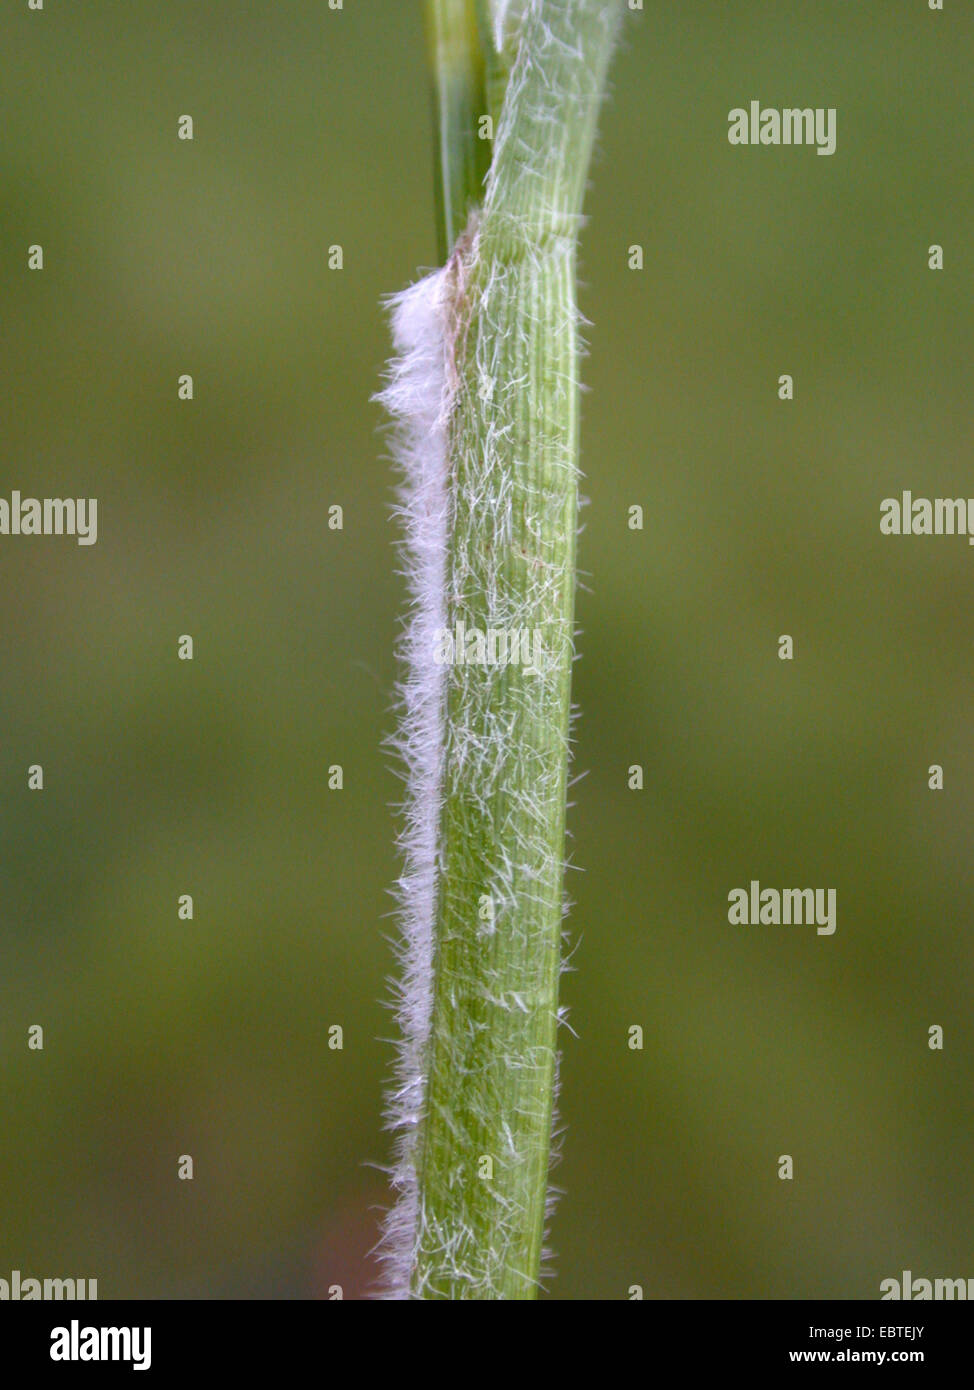 hairy sedge (Carex hirta), hairy sprout, Germany Stock Photo